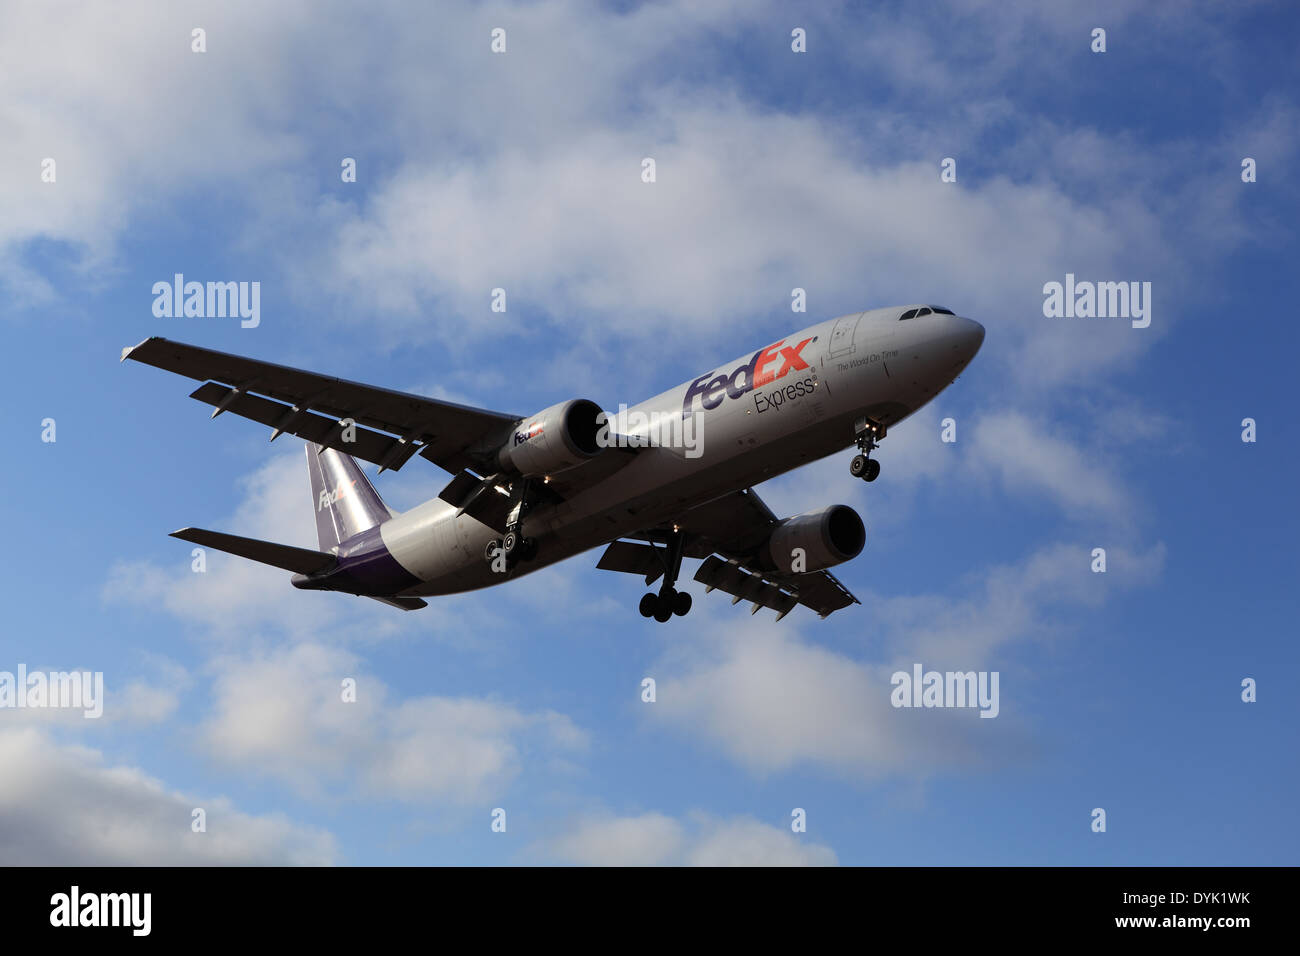 Page 9 - Fedex High Resolution Stock Photography and Images - Alamy